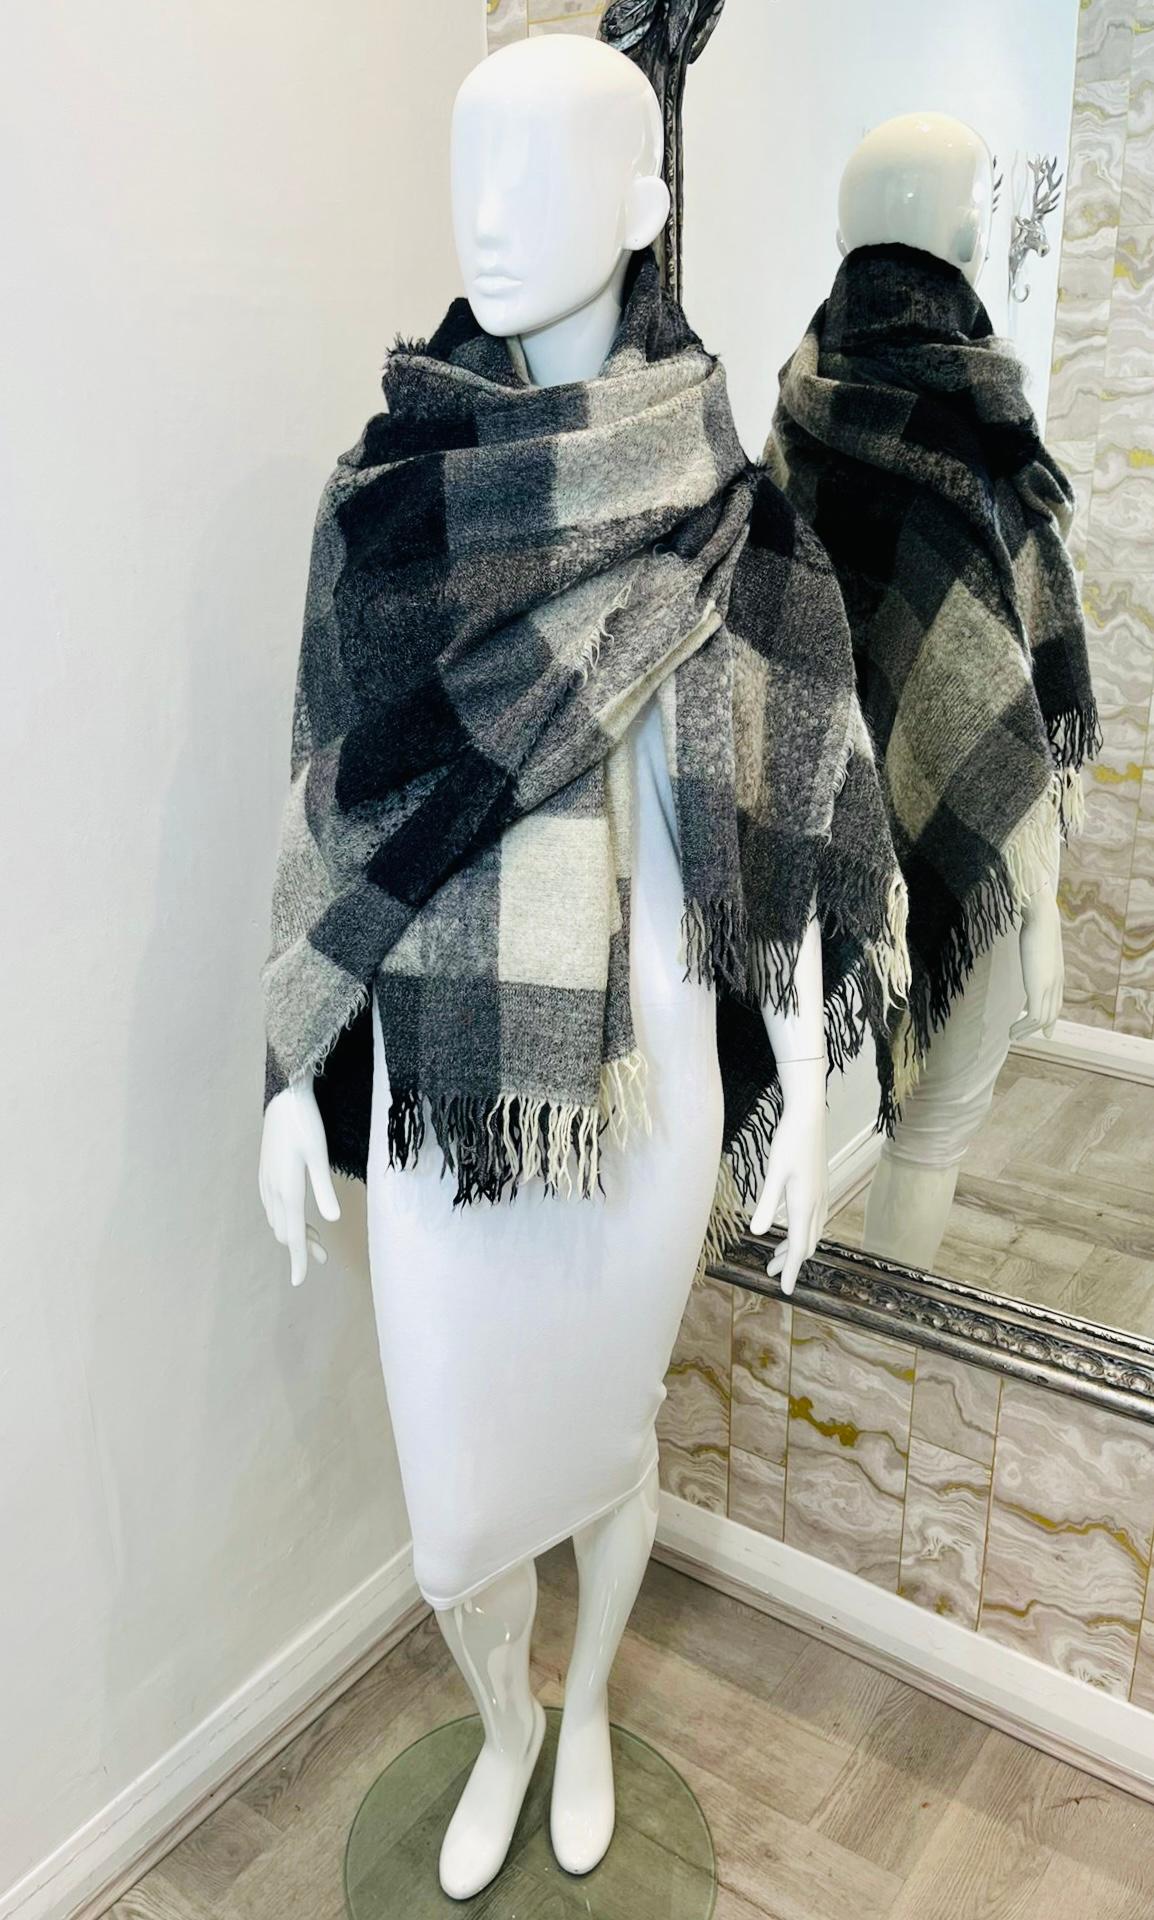 Mulberry Wool & Mohair Checked Shawl/Wrap

Large shawl designed with check pattern in white, black and grey.

Detailed with fringing at both sides.

Size – 212/214cm

Condition – Very Good

Composition – 70% Wool, 25% Mohair, 5% Nylon